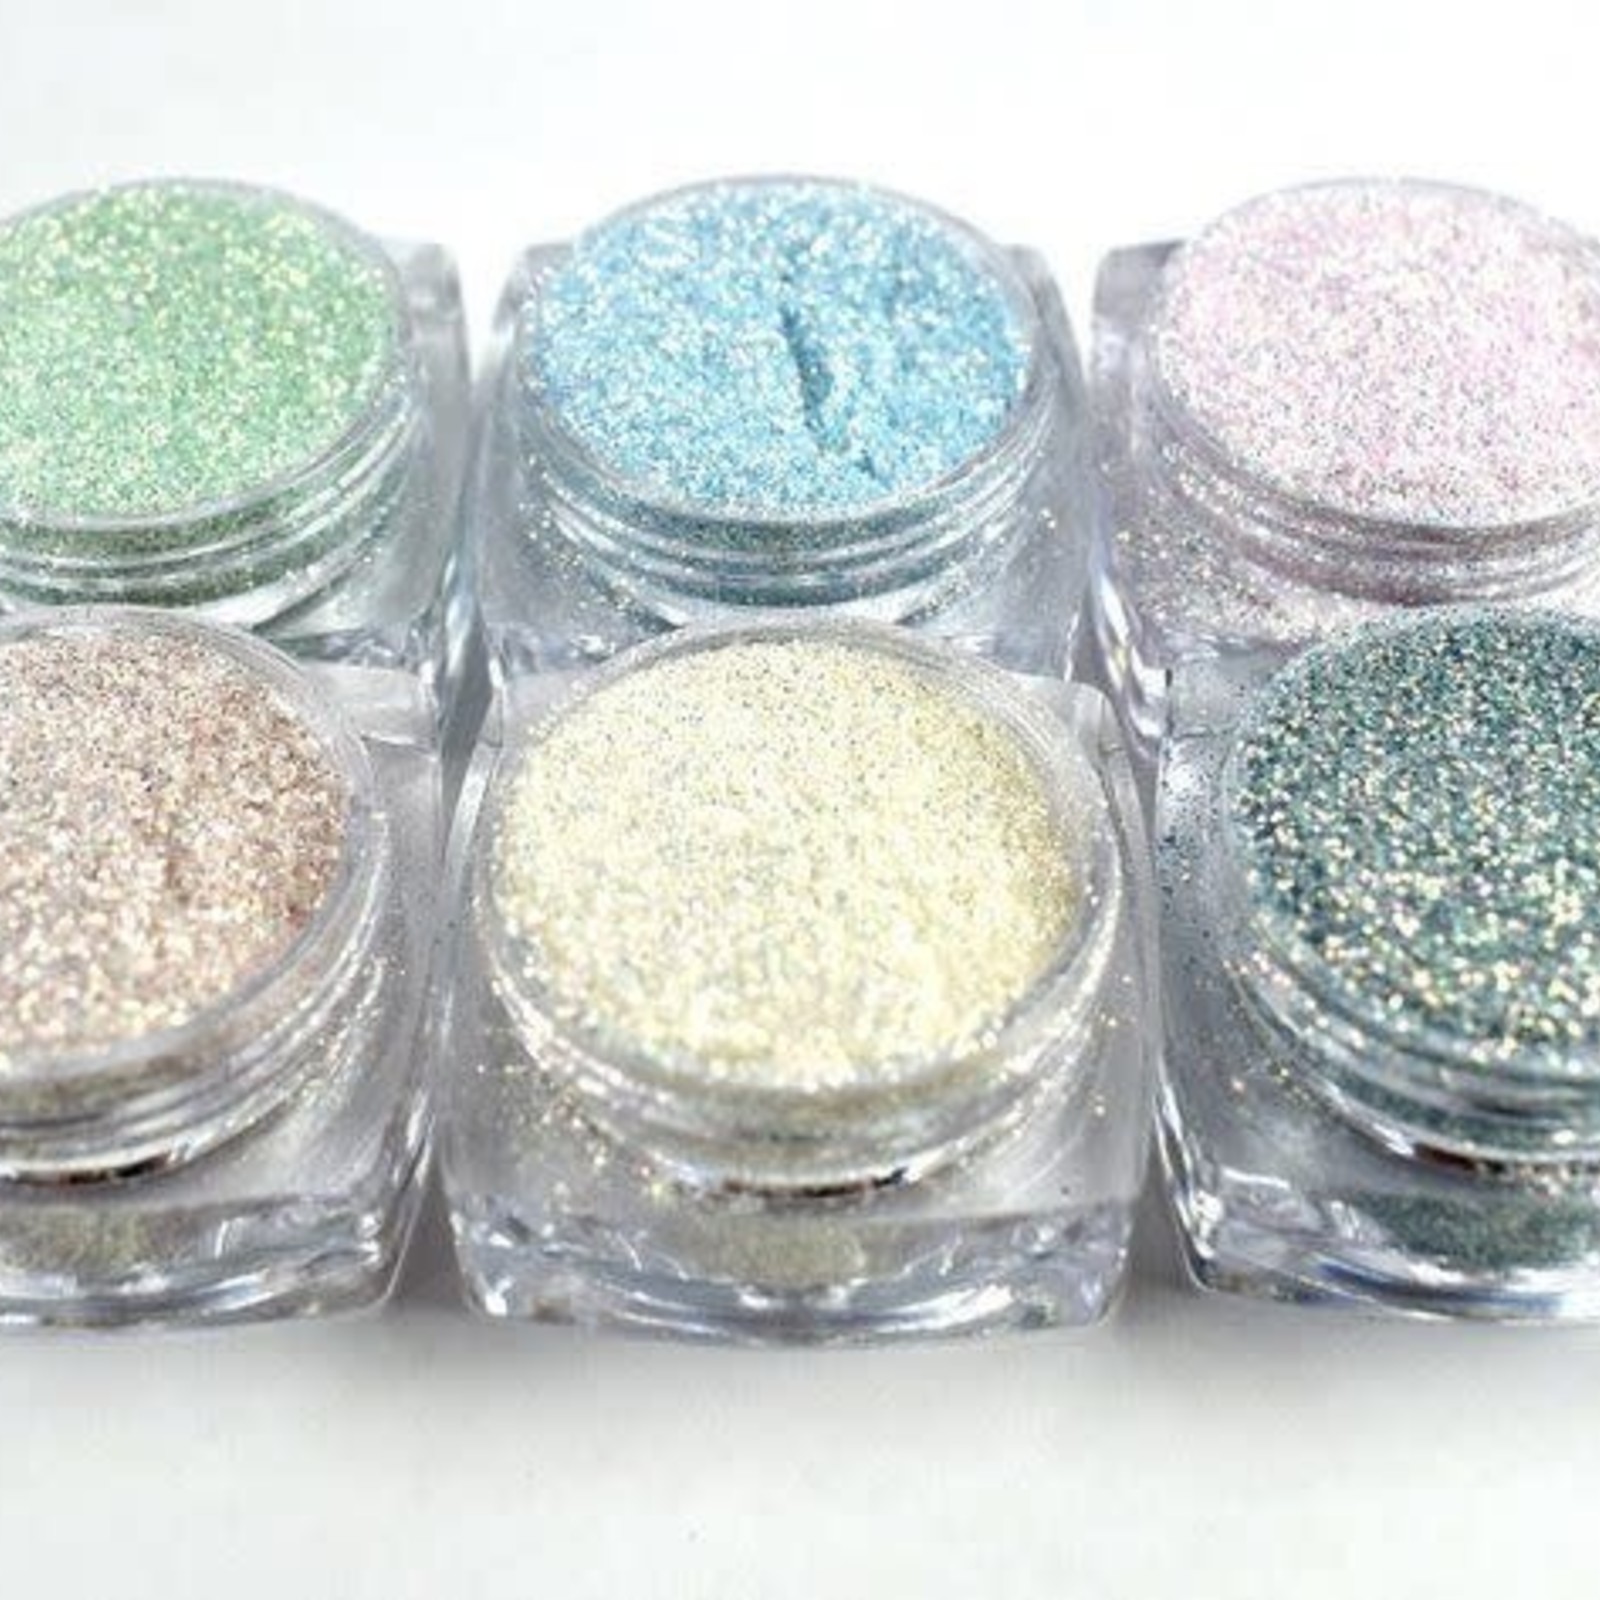 Urban nails Seriously soft glitter collection